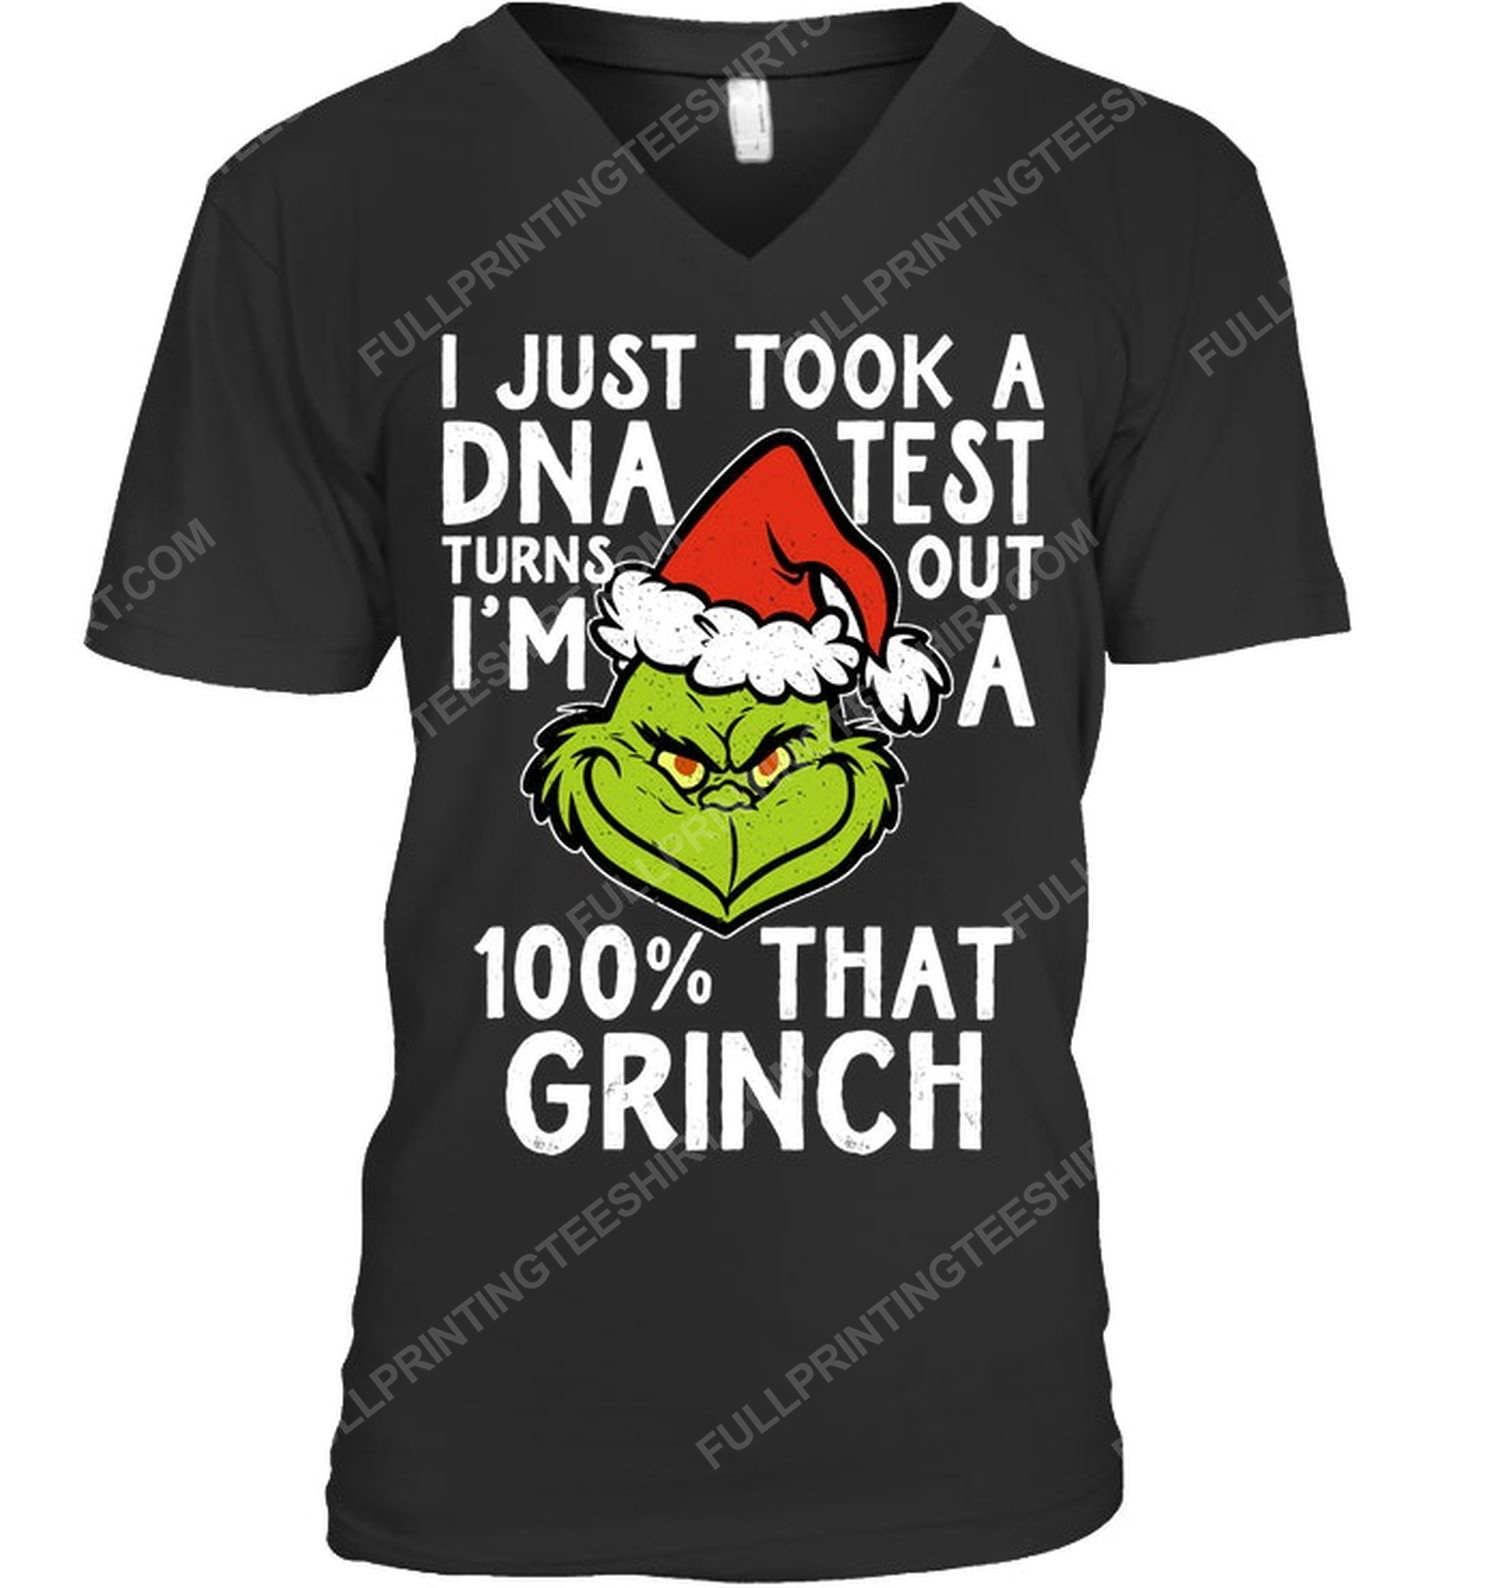 I just took a dna test turns out i'm 100 that grinch v-neck